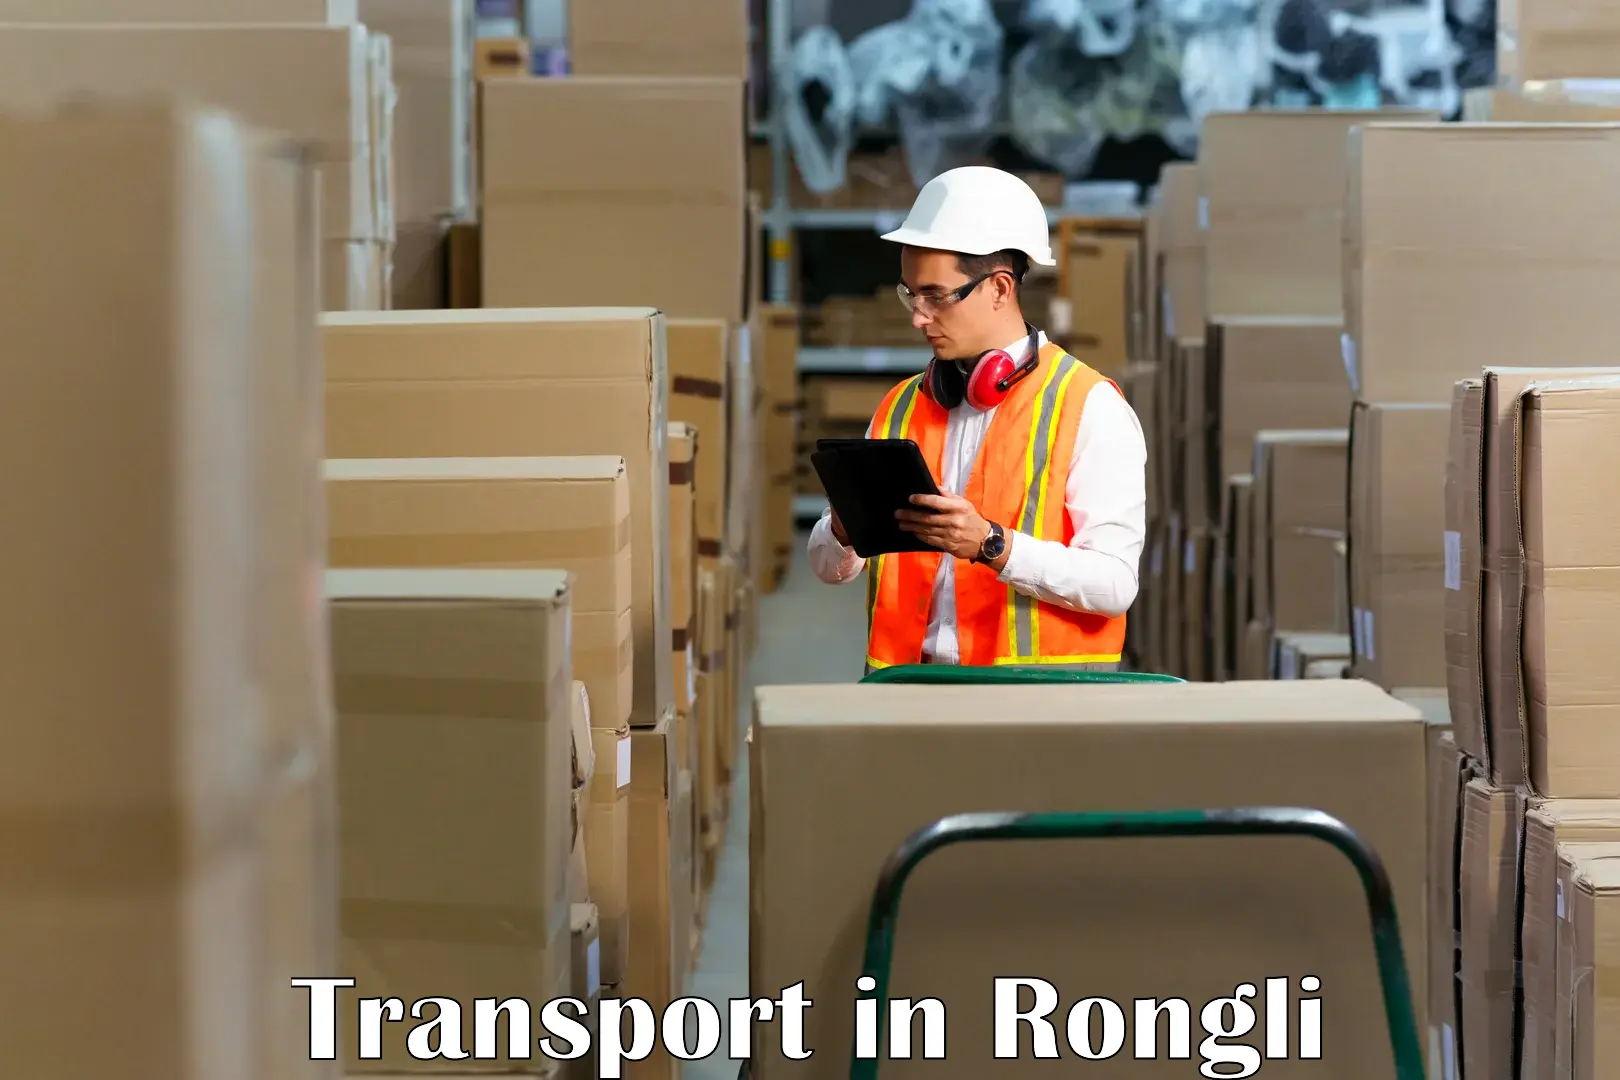 Container transportation services in Rongli